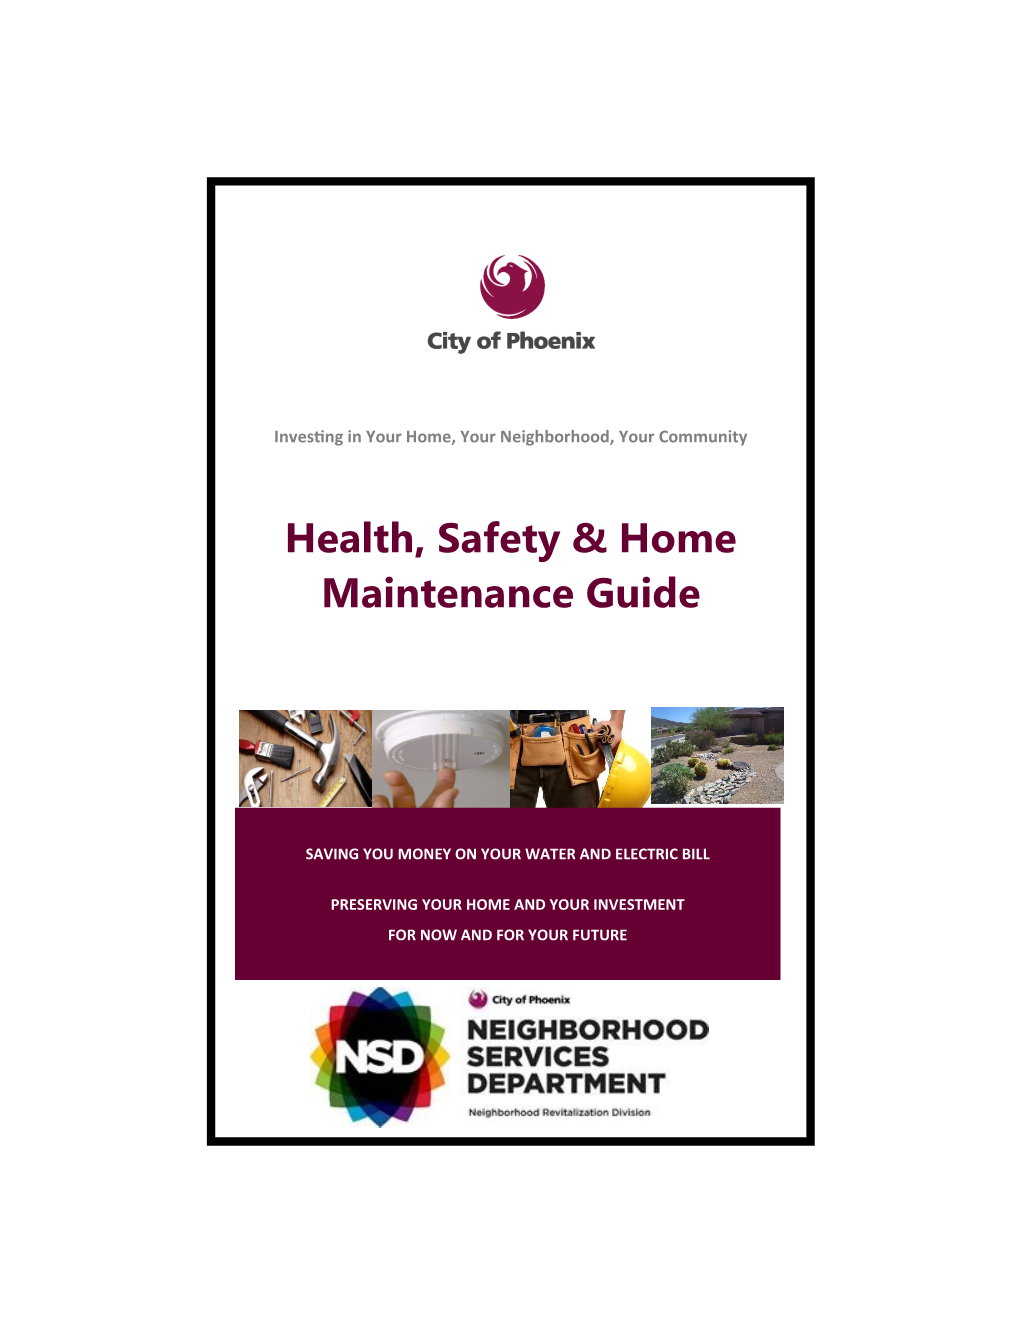 Health, Safety & Home Maintenance Guide